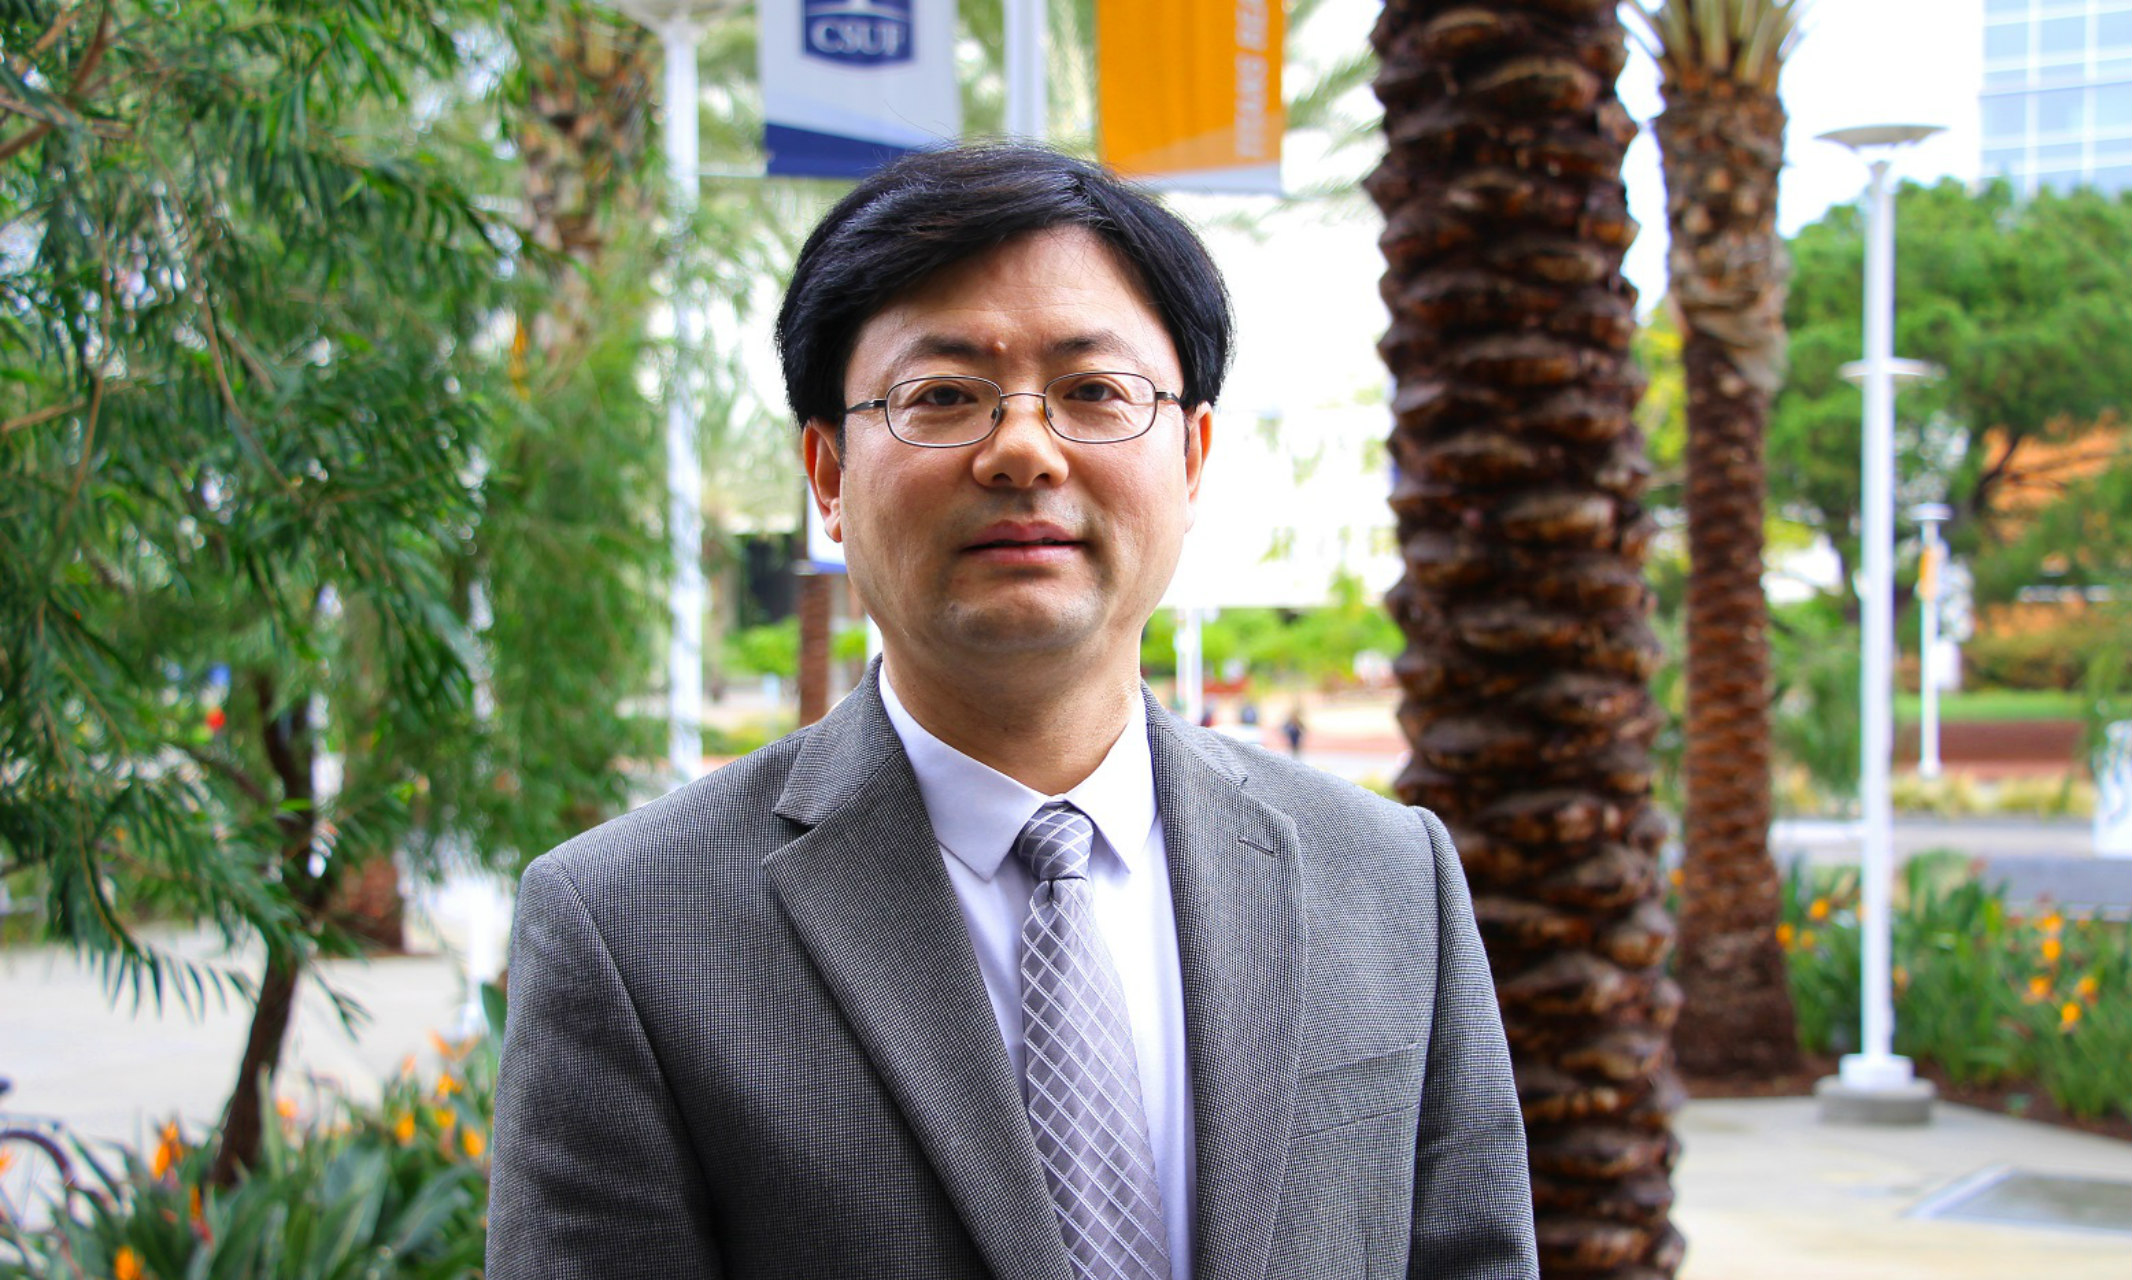 Portrait of Chris Liu, who becomes UMKC Vice Chancellor of Research in August 2019